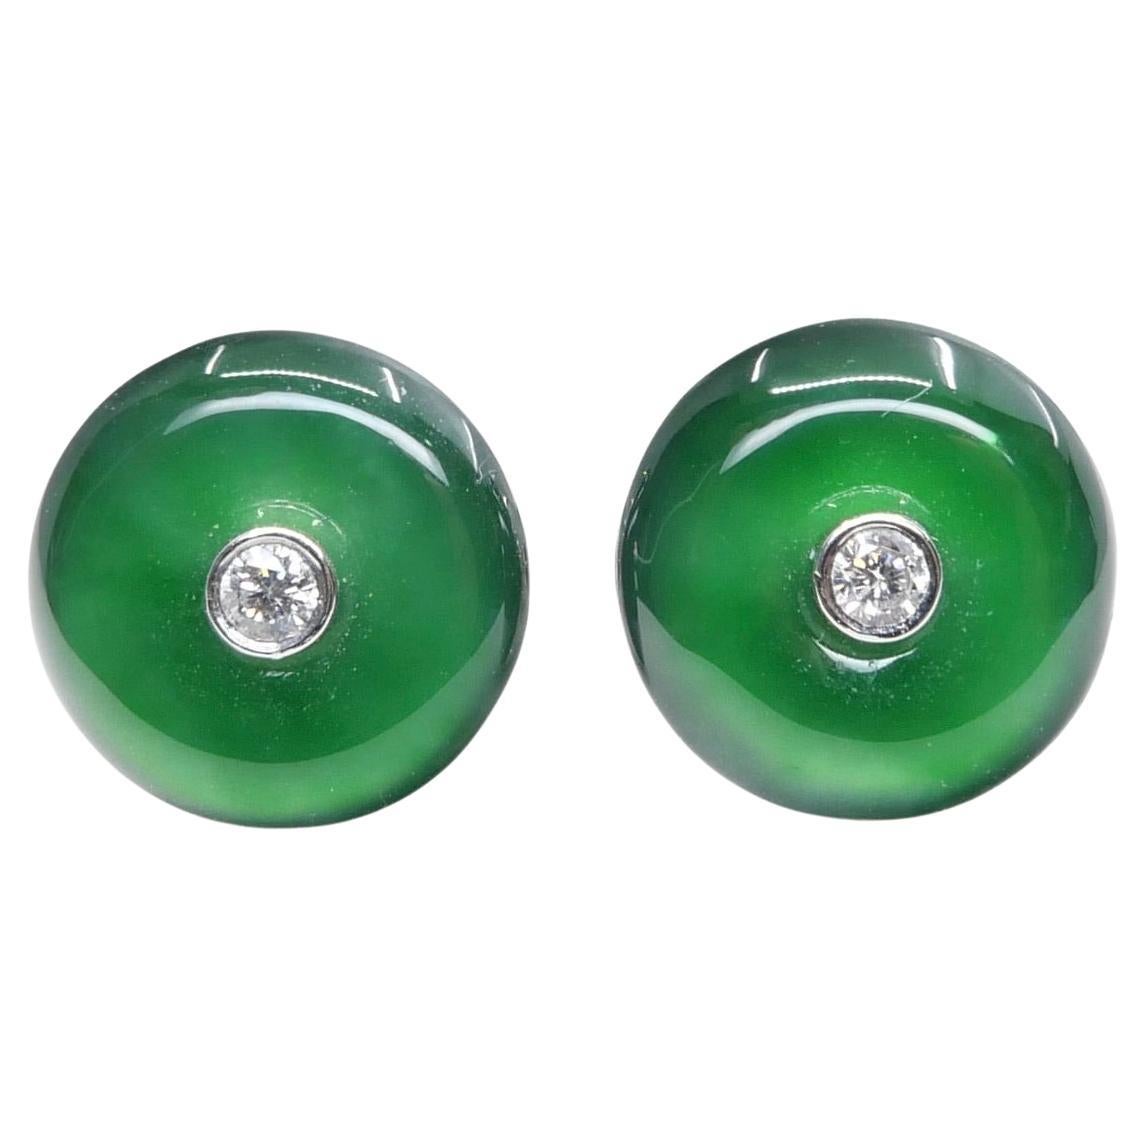 Certified Natural Type A Jadeite Jade And Diamond Earrings. Imperial Green Color